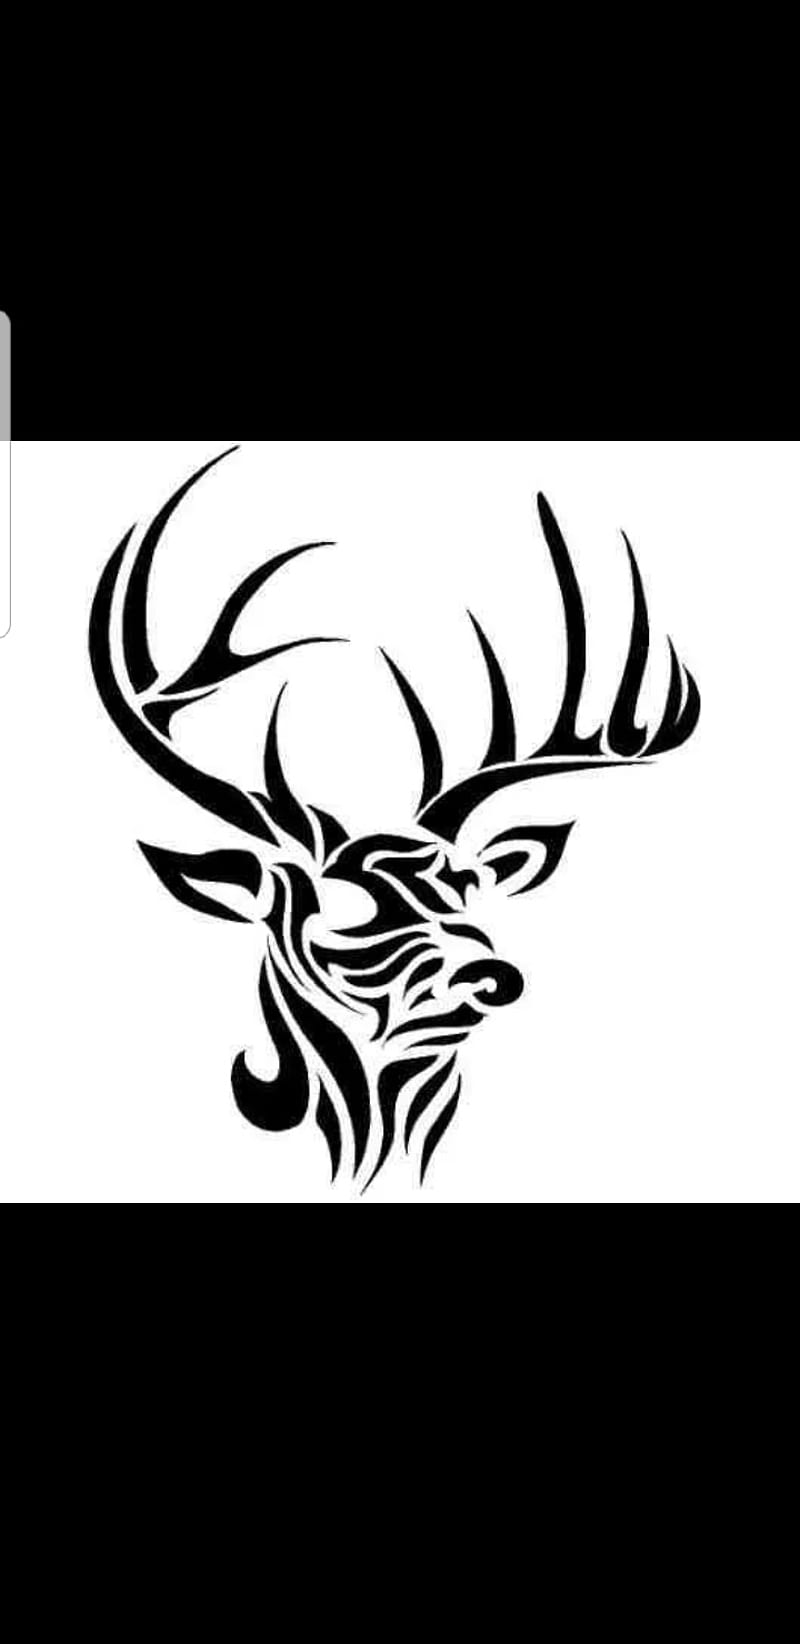 Deer Tattoos: Meanings, Symbolism, and 40+ Best Design Ideas - Saved Tattoo